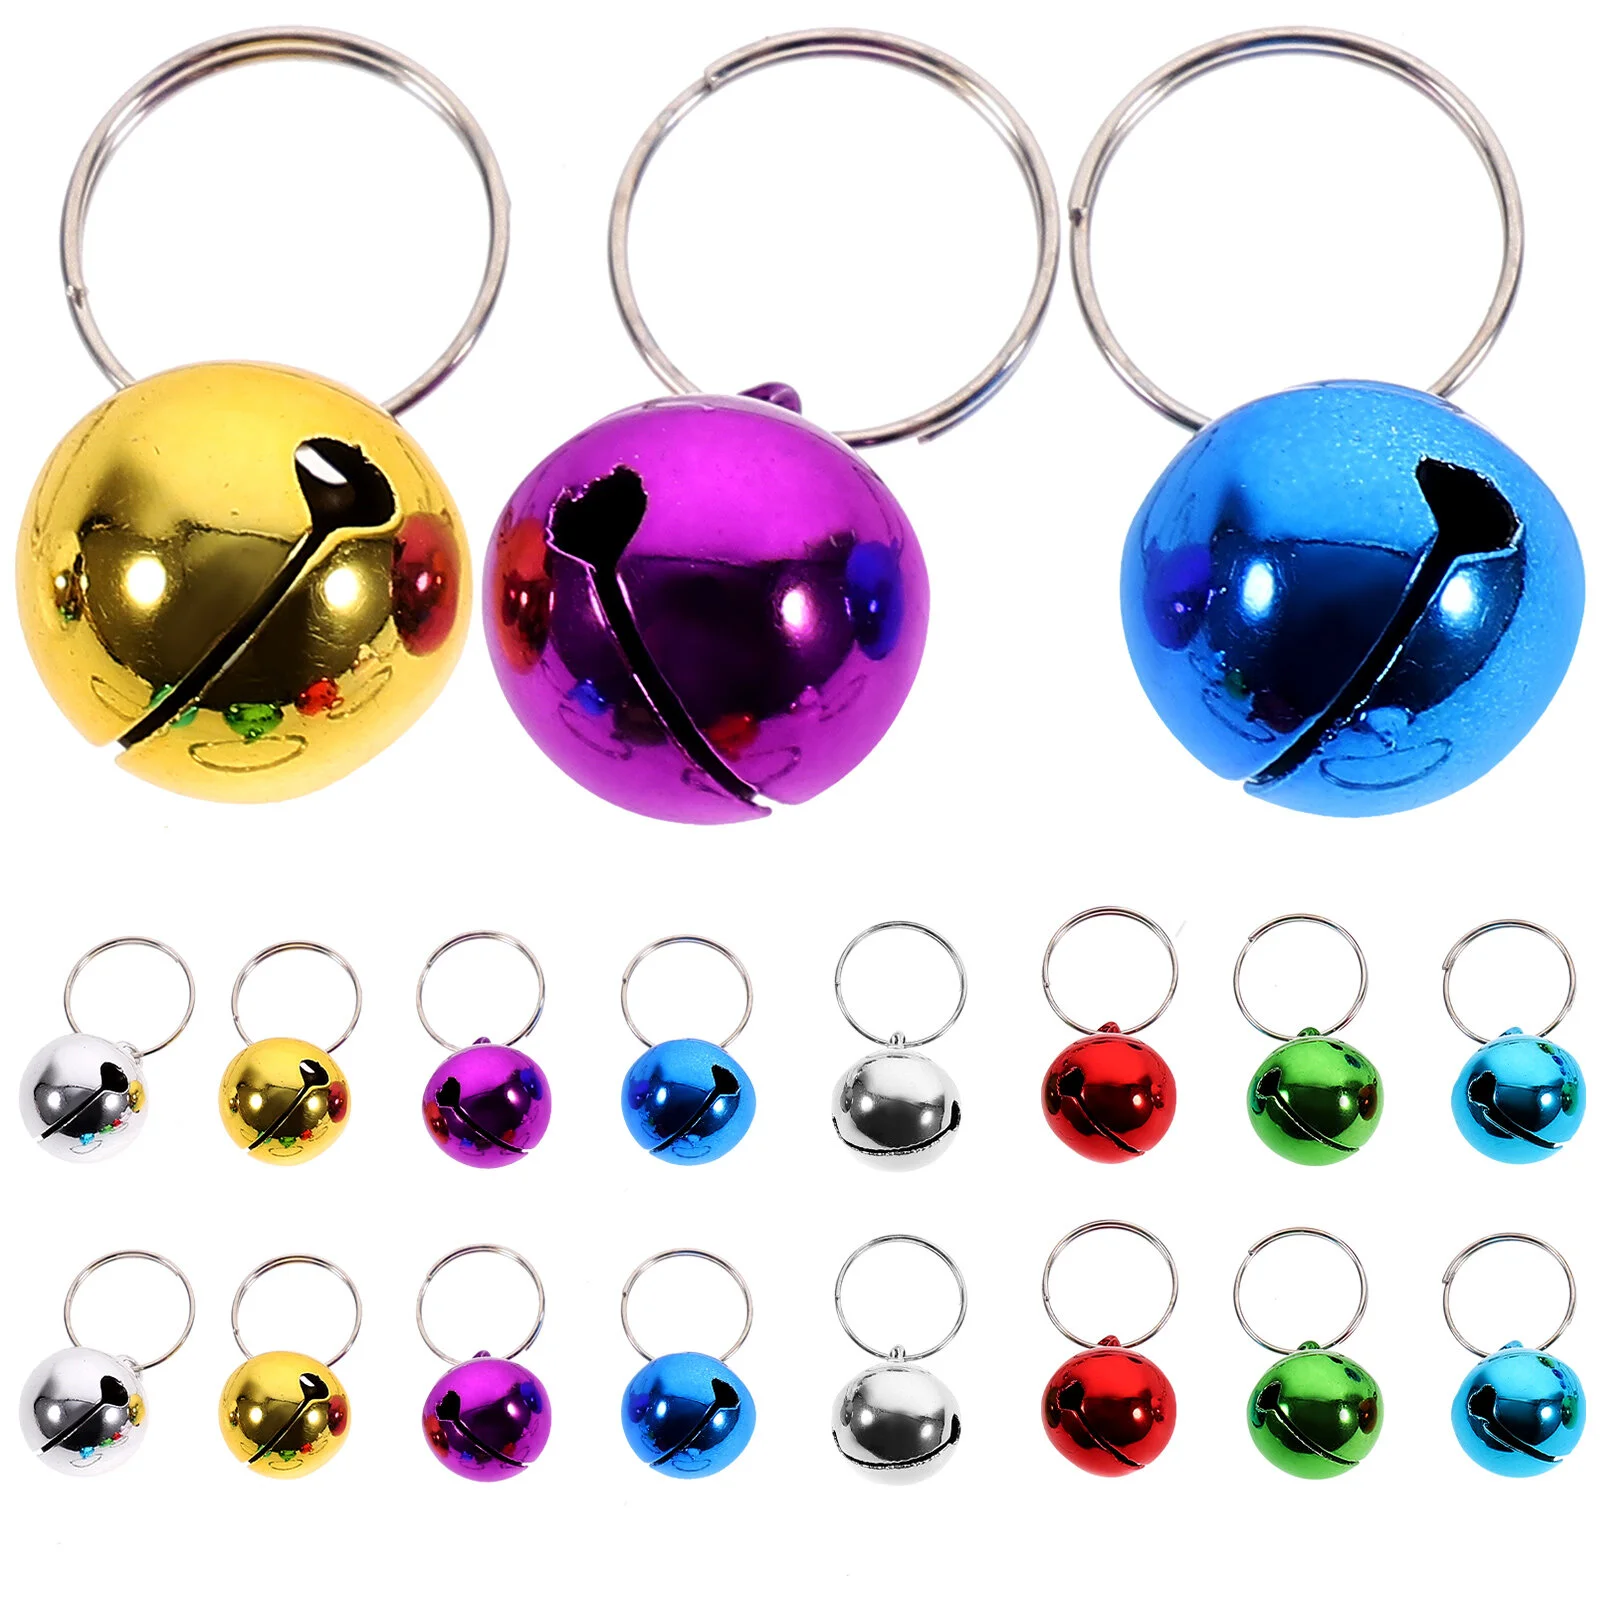 

24 Pcs Pet Accessories Craft Bells Vintage Festival The 1.4X1.3cm Delicate Small Dog Collar Colorful Metal Crafts